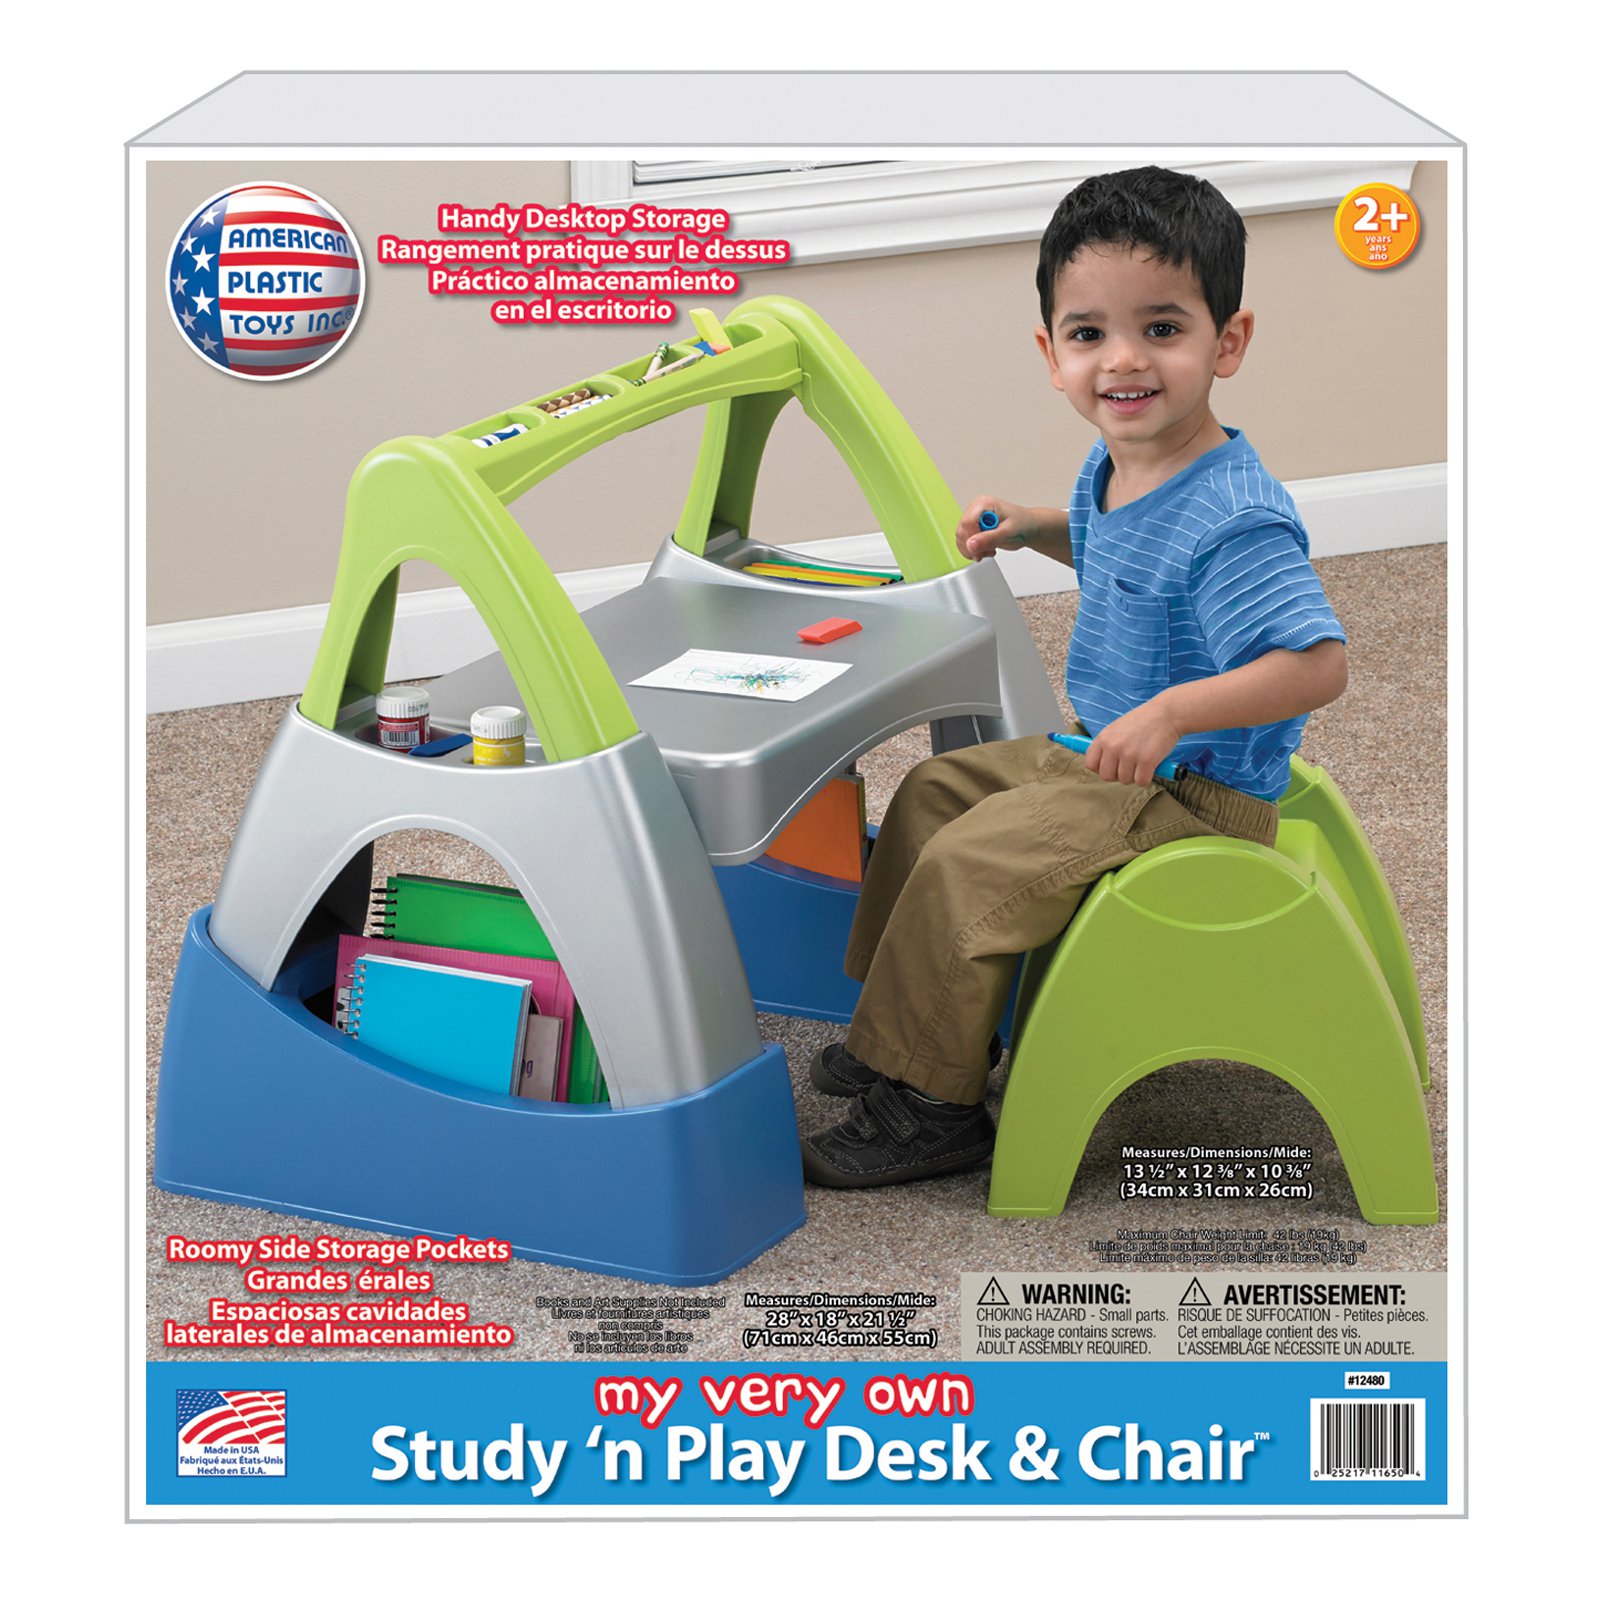 American Plastic Toys Study 'N' Play Desk & Chair Set - image 5 of 5